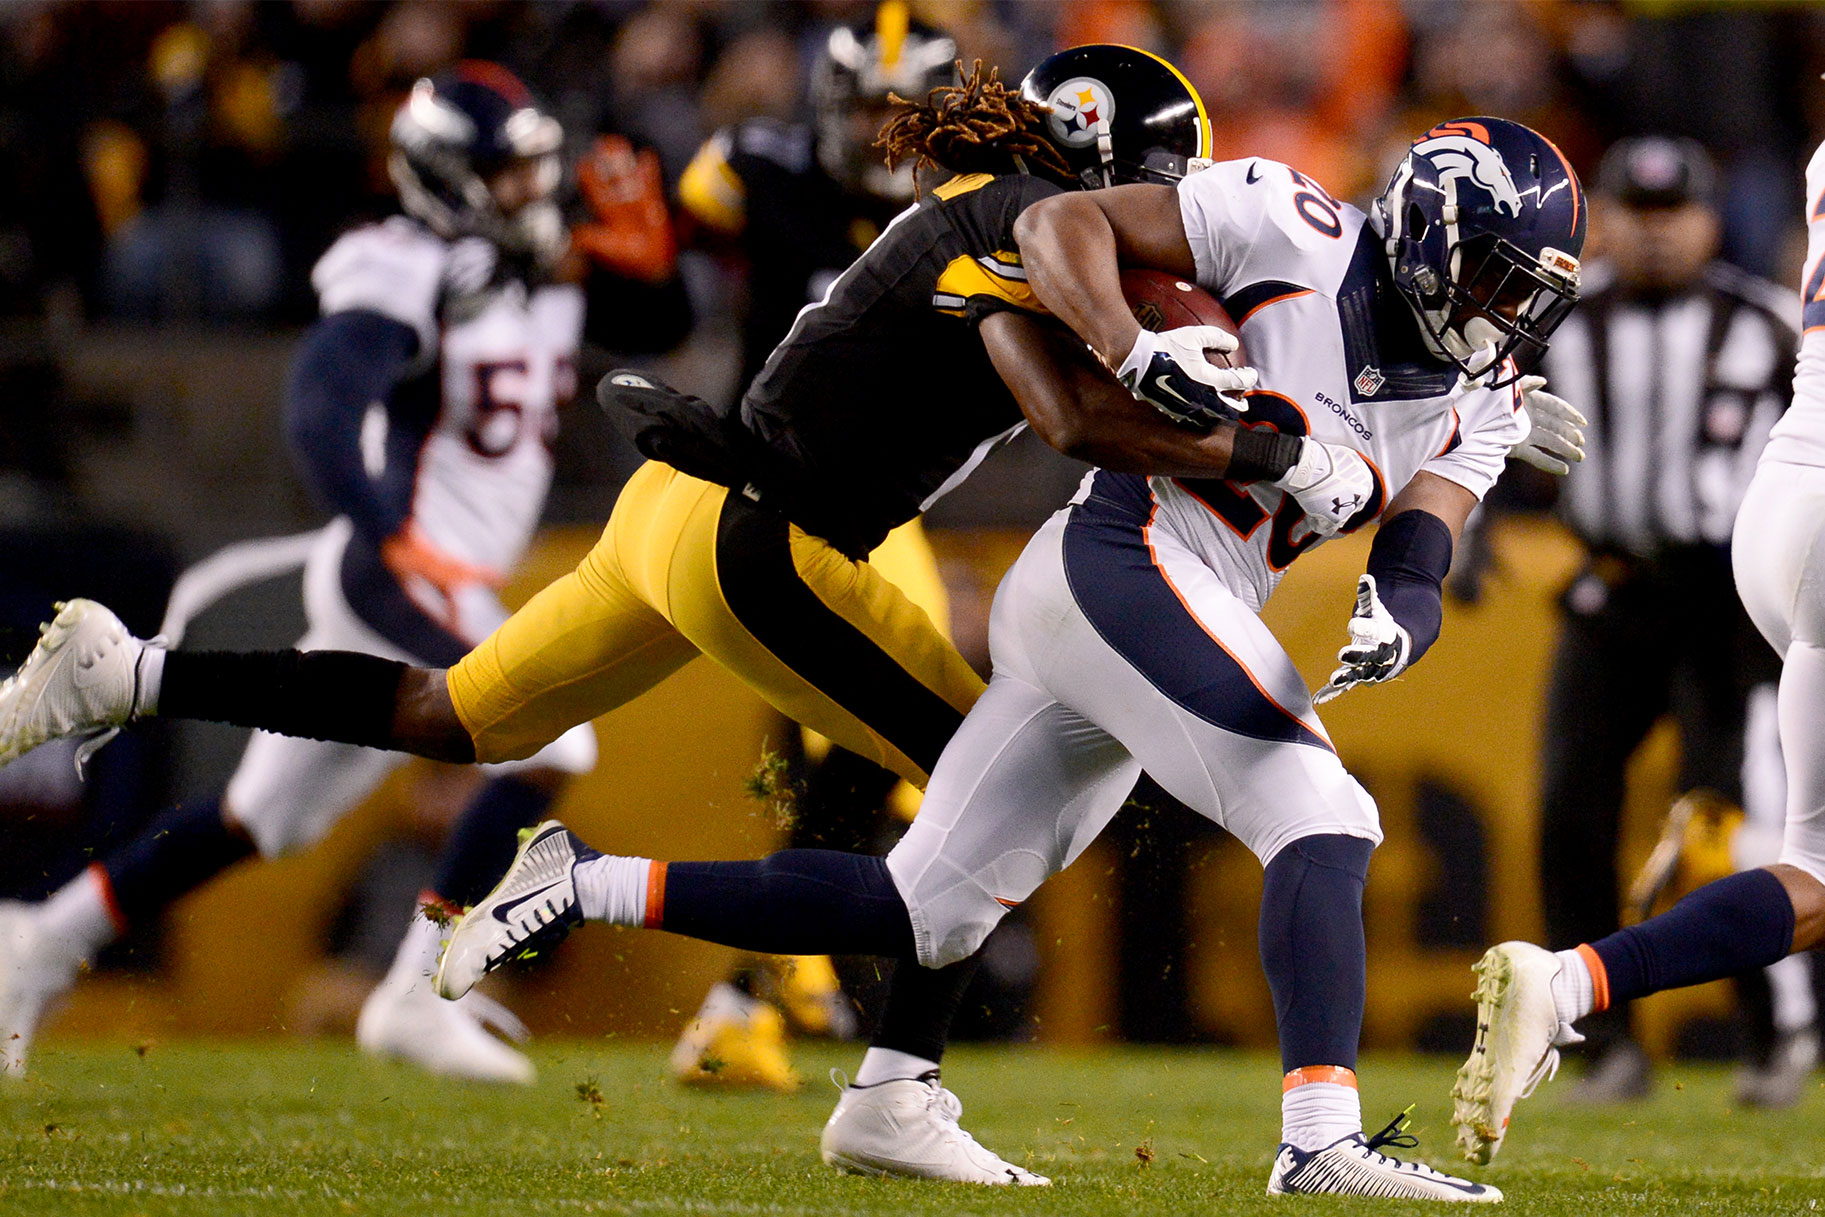 Markus Wheaton of the Pittsburgh Steelers stops Josh Bush of the Denver Broncos after an interception during the first half of play at Heinz Field.